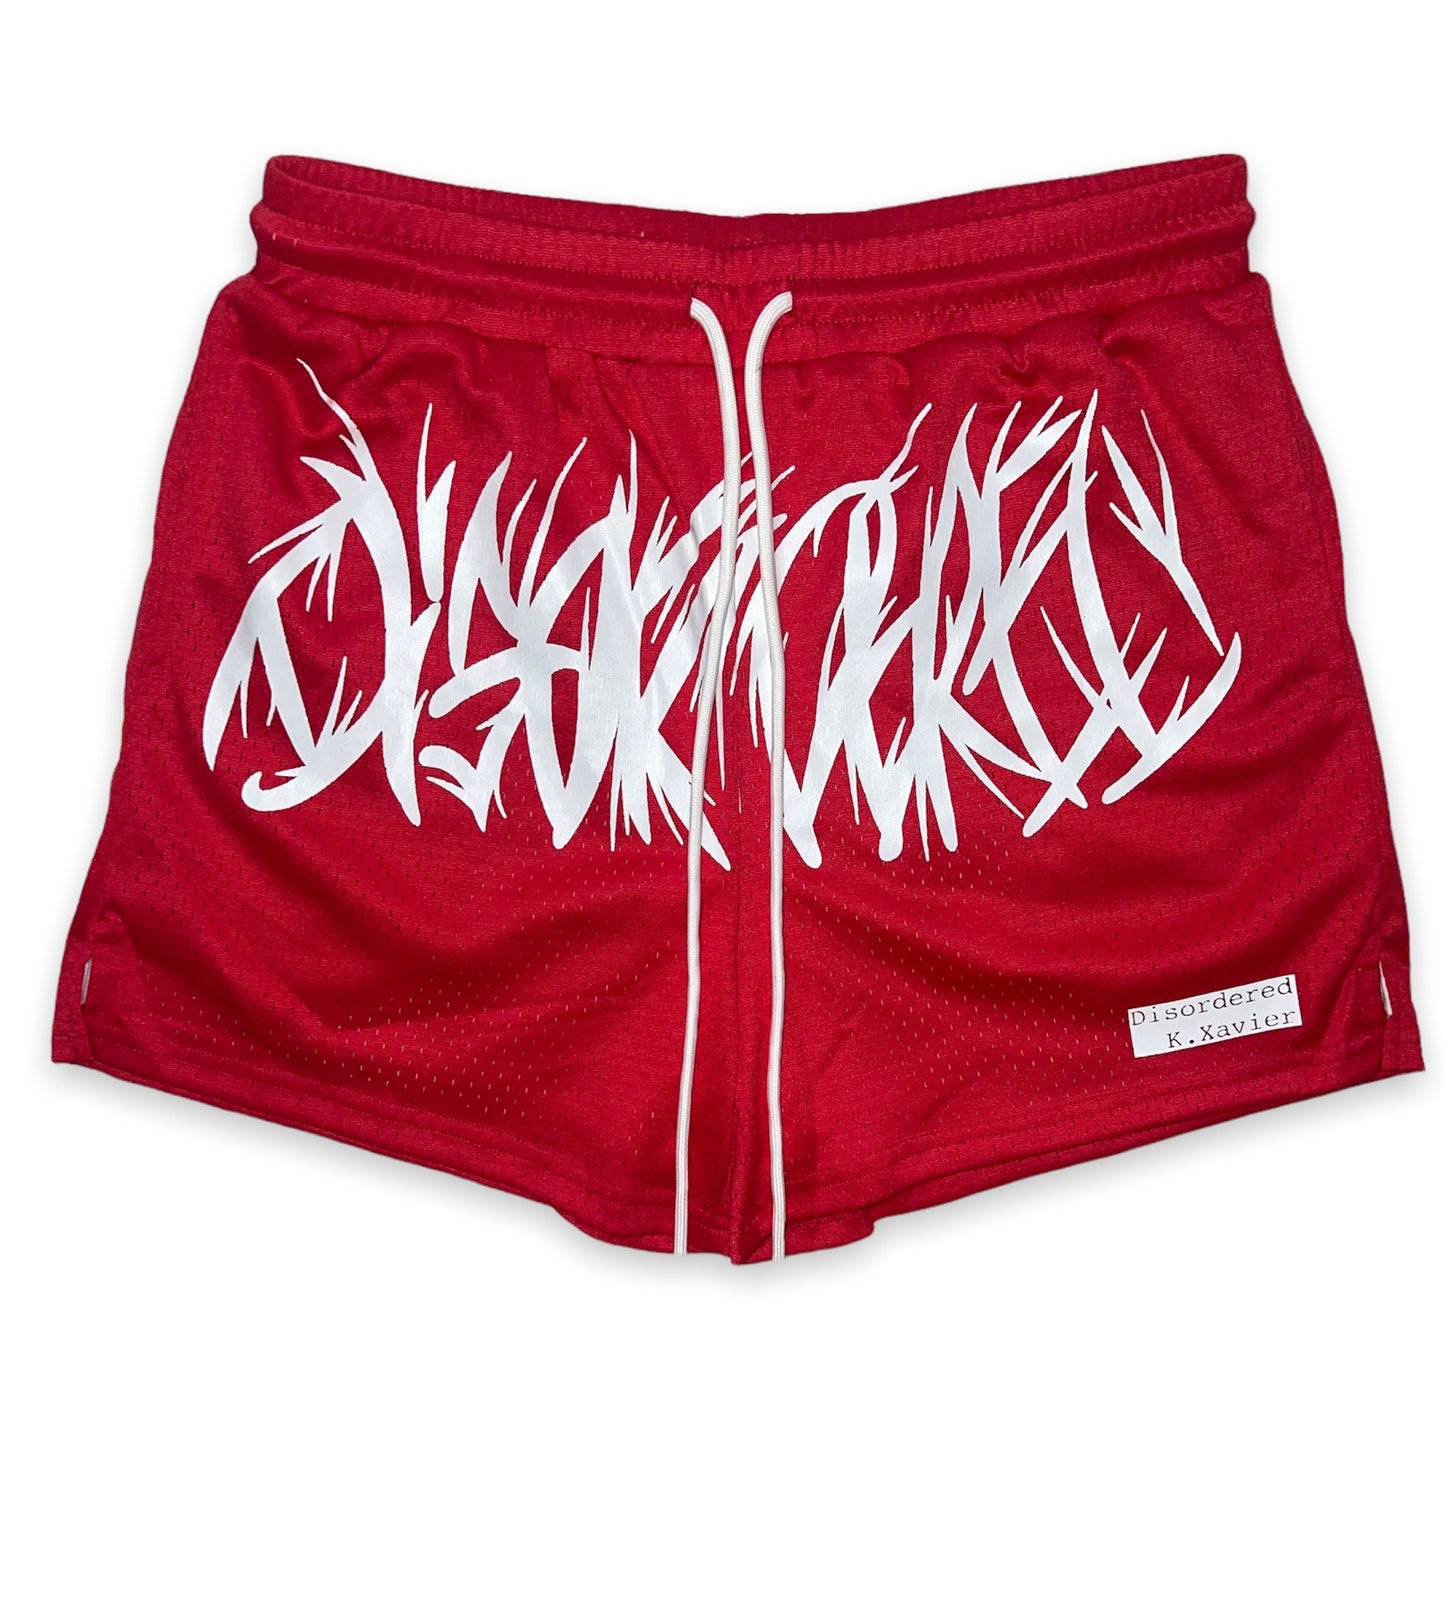 RED DISORDERED SHORTS